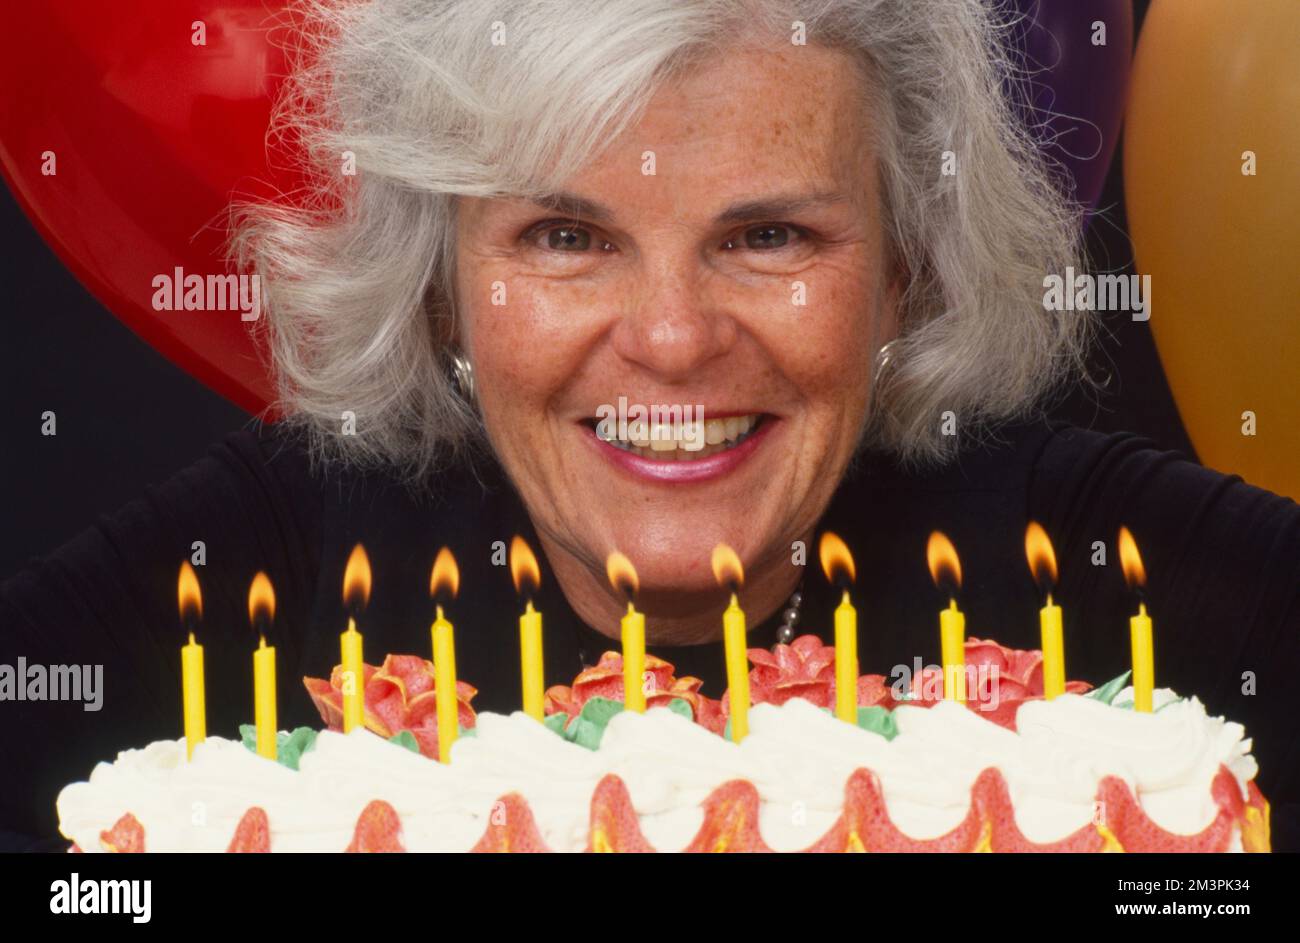 Older grey haired woman getting ready to blow out the candles on her birthday cake Stock Photo